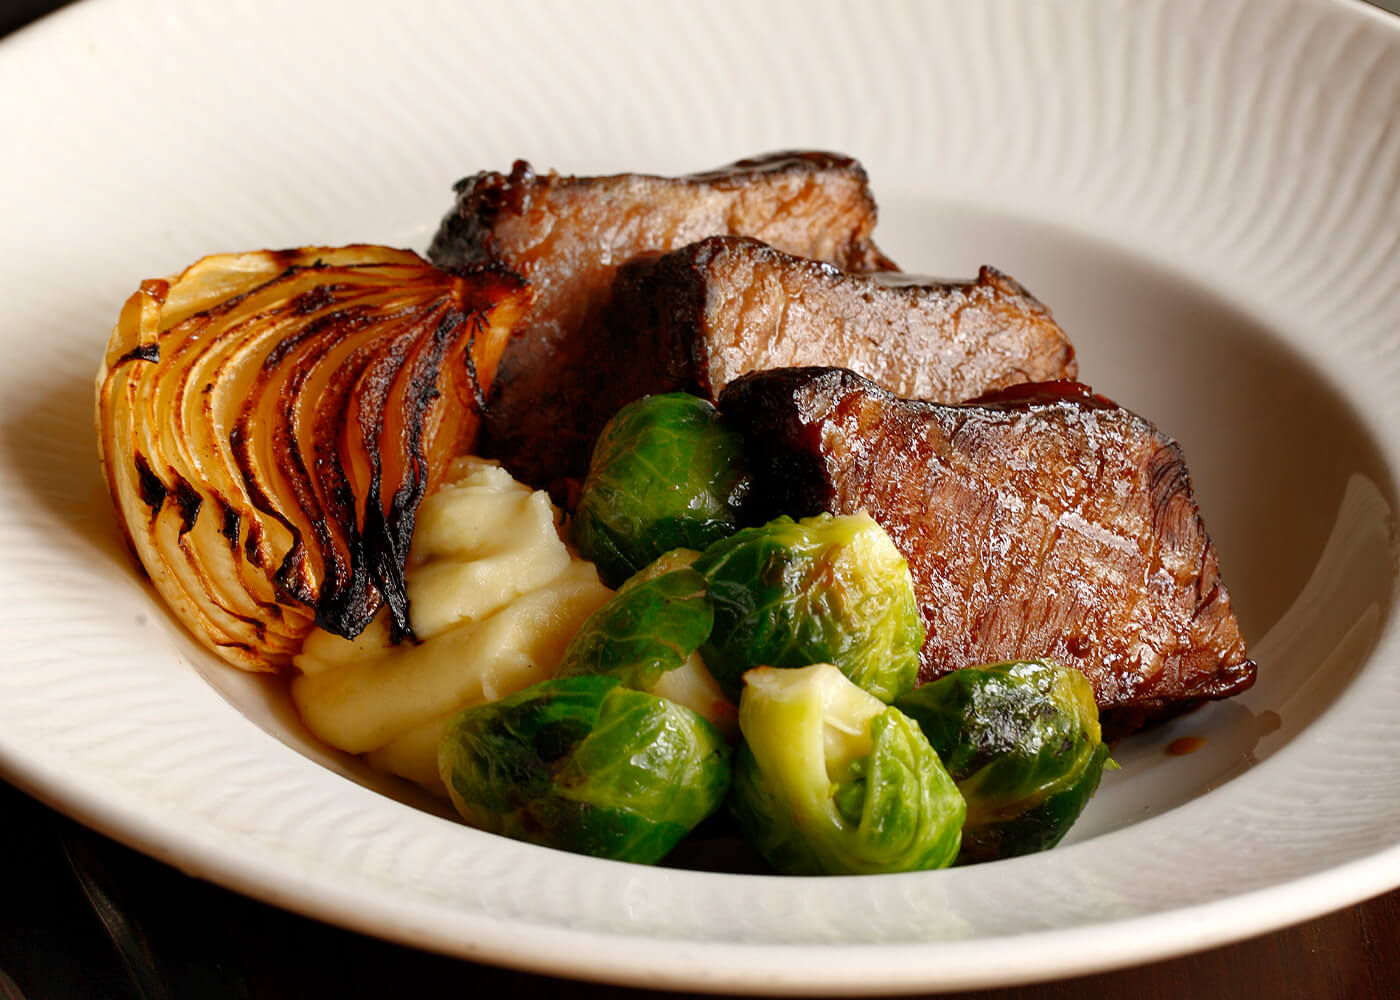 Plated steak and brussel sprouts